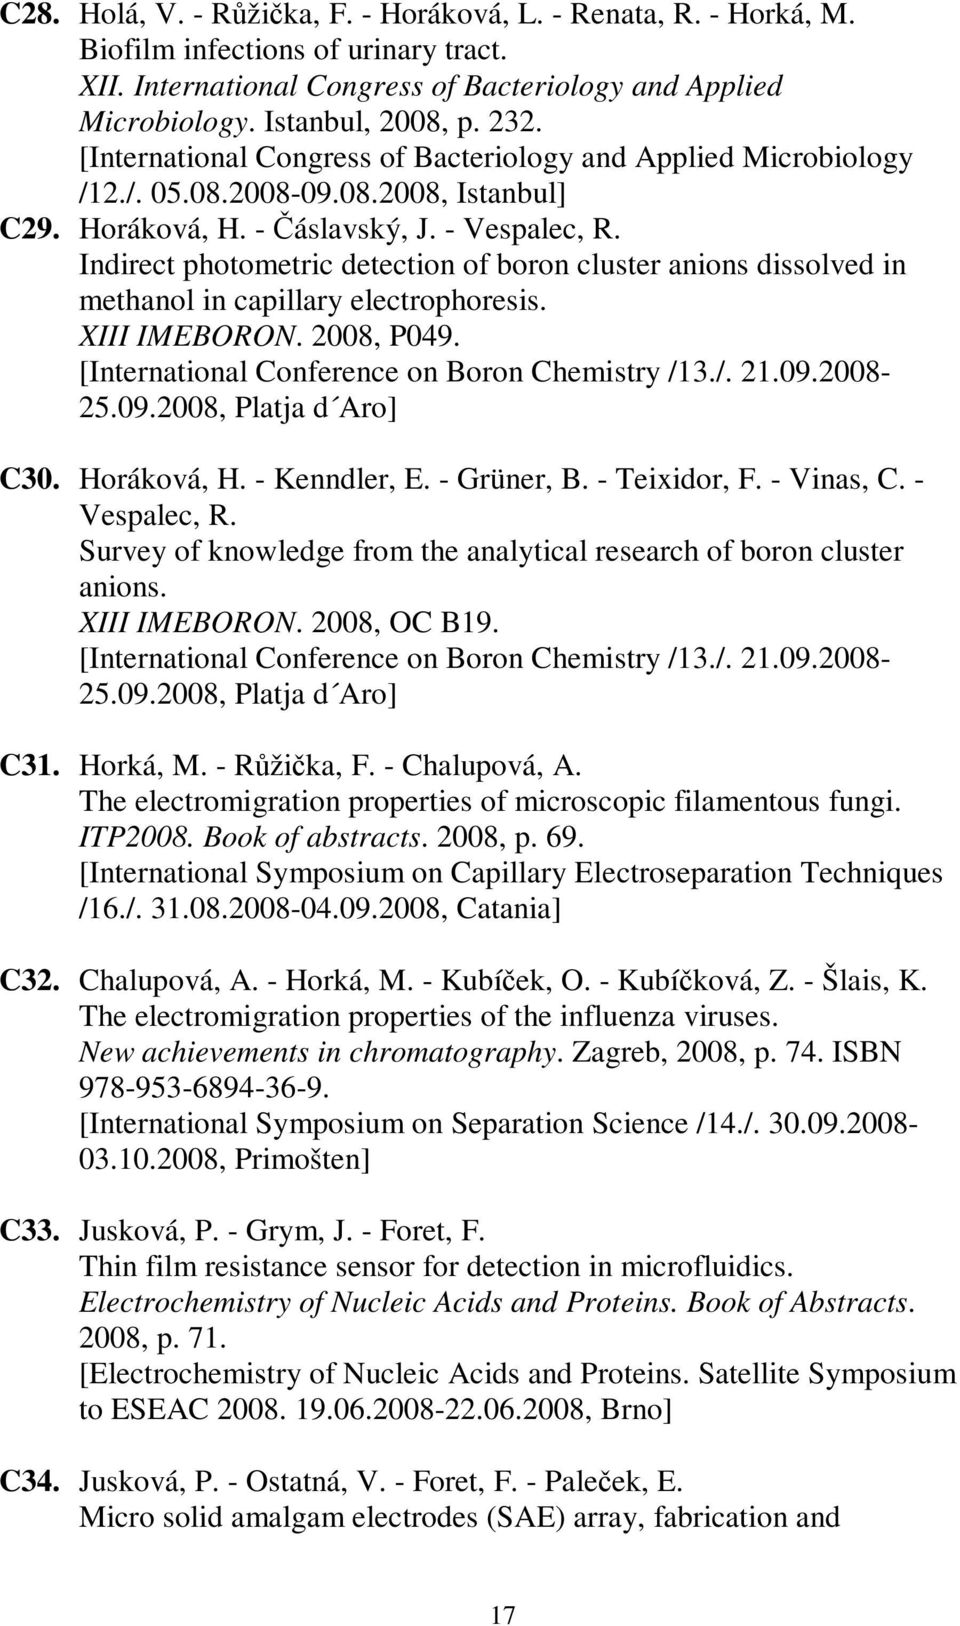 Indirect photometric detection of boron cluster anions dissolved in methanol in capillary electrophoresis. XIII IMEBORON. 2008, P049. [International Conference on Boron Chemistry /13./. 21.09.2008-25.